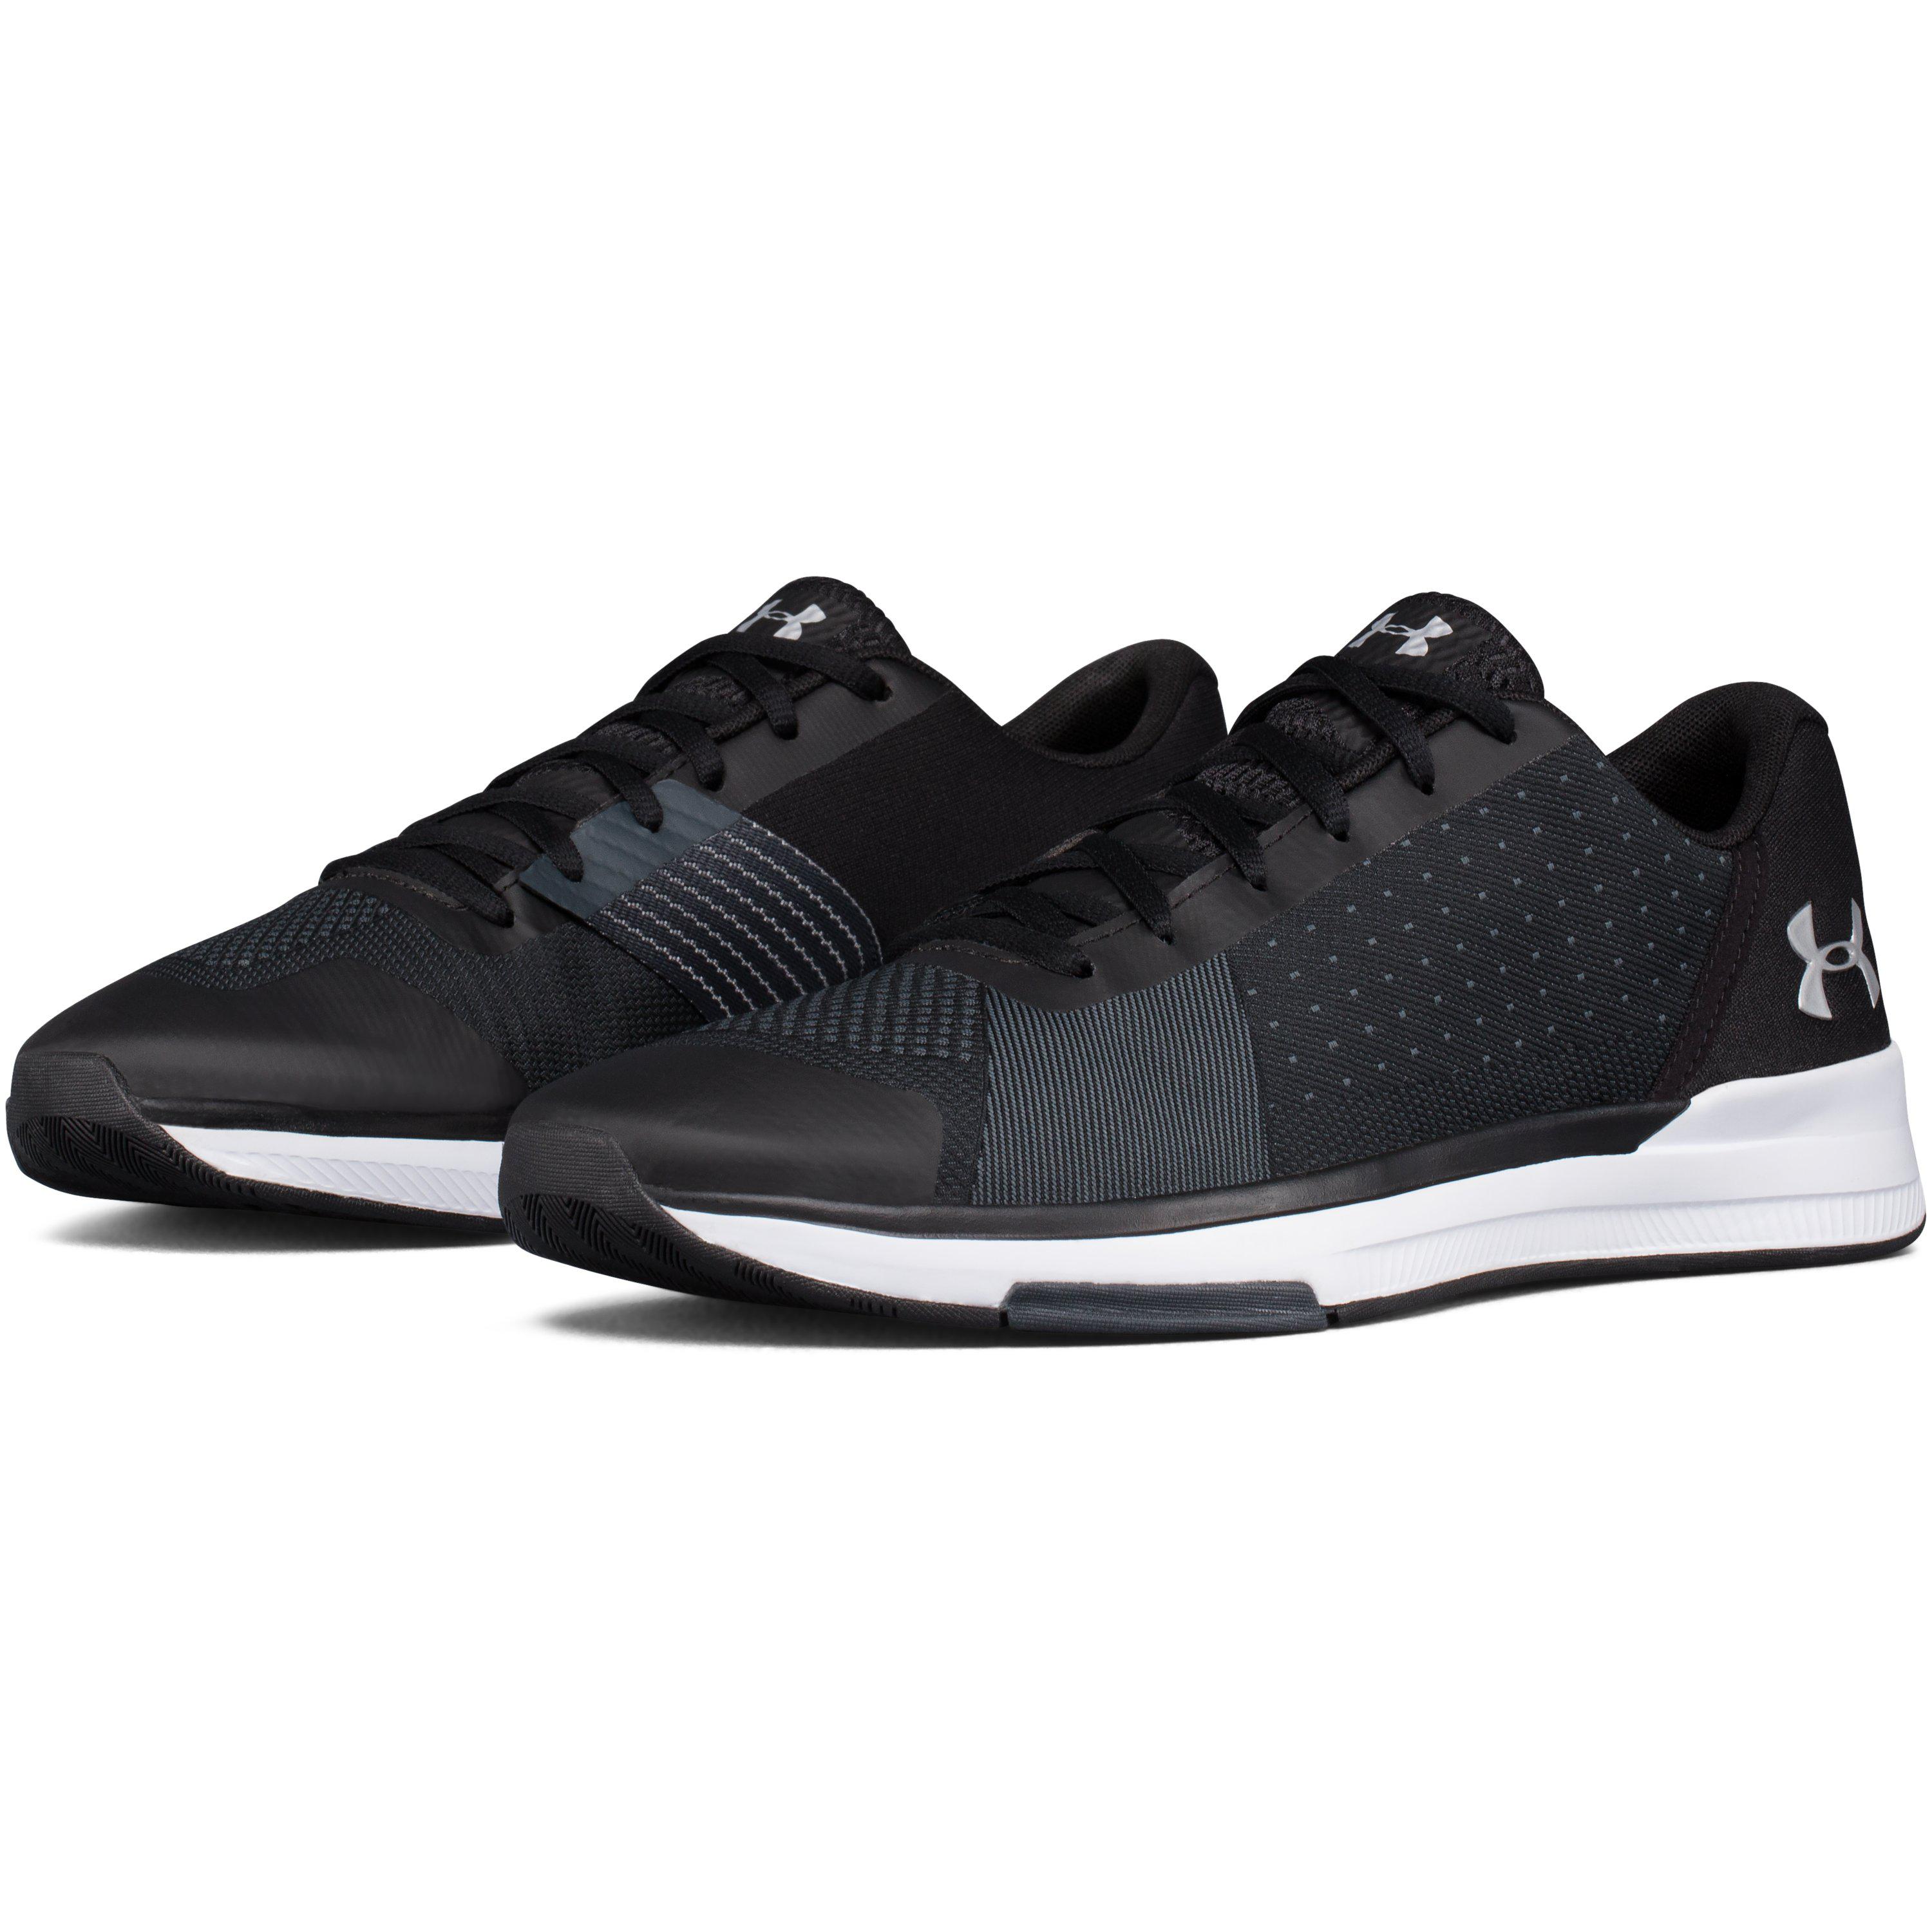 Under Armour Rubber Men's Ua Showstopper Training Shoes in Black for ...